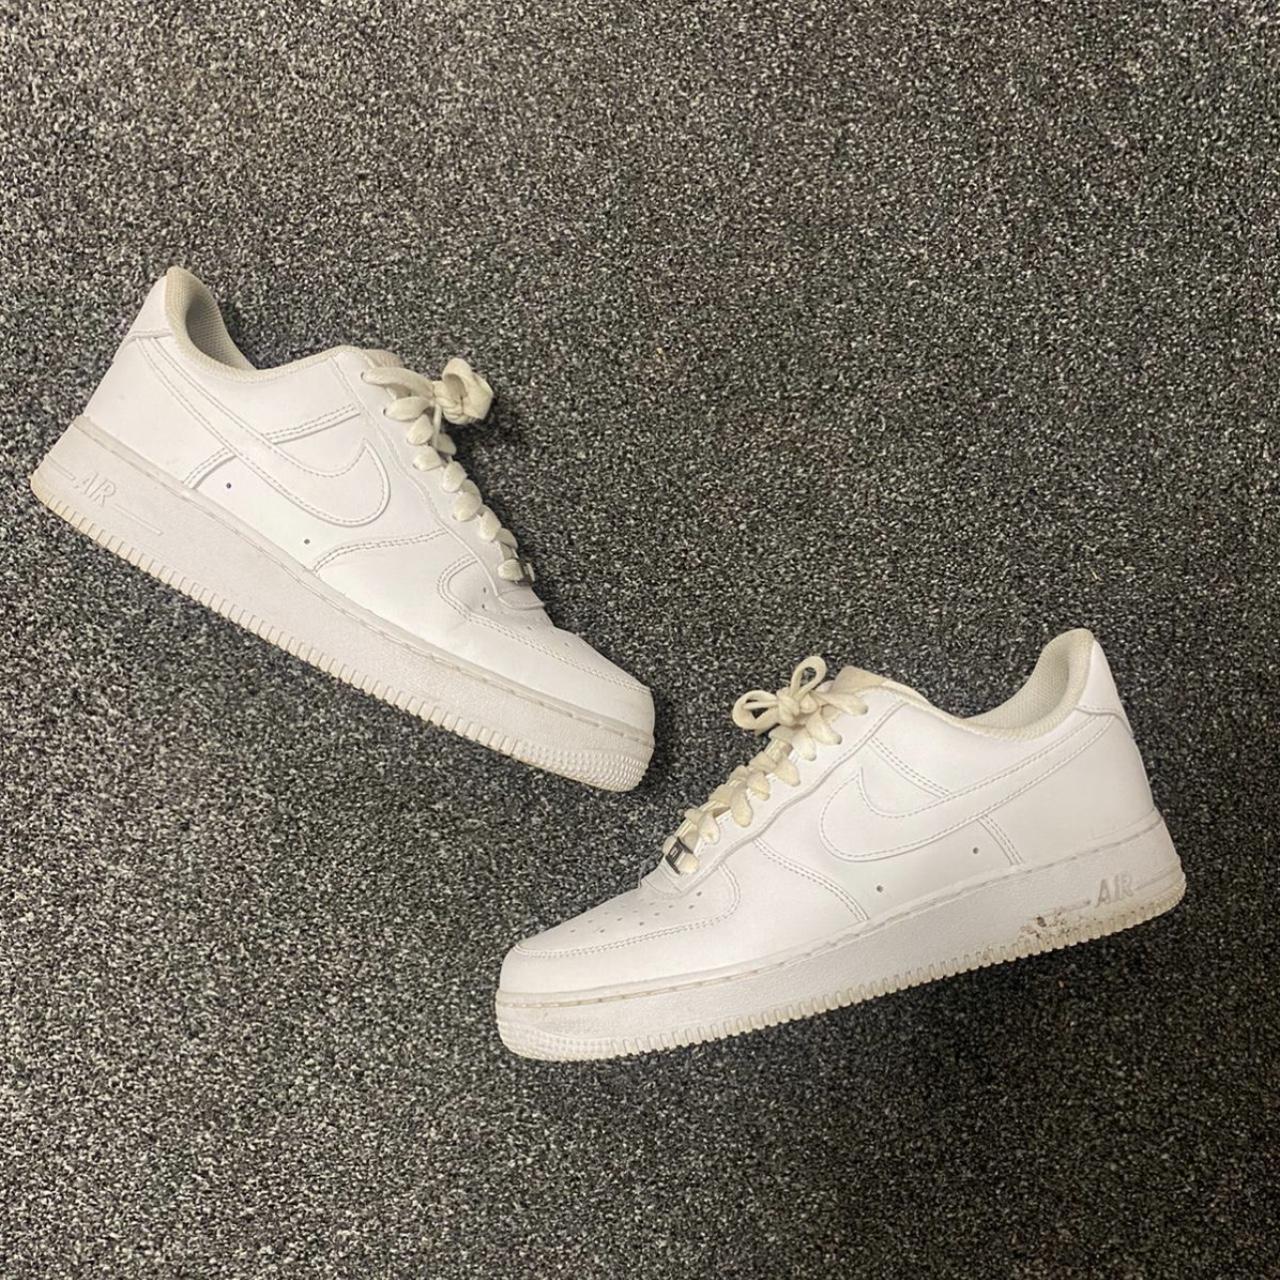 NIKE AIR FORCE 1S WORN, DECENT CONDITION SIZE- 7 £40 - Depop